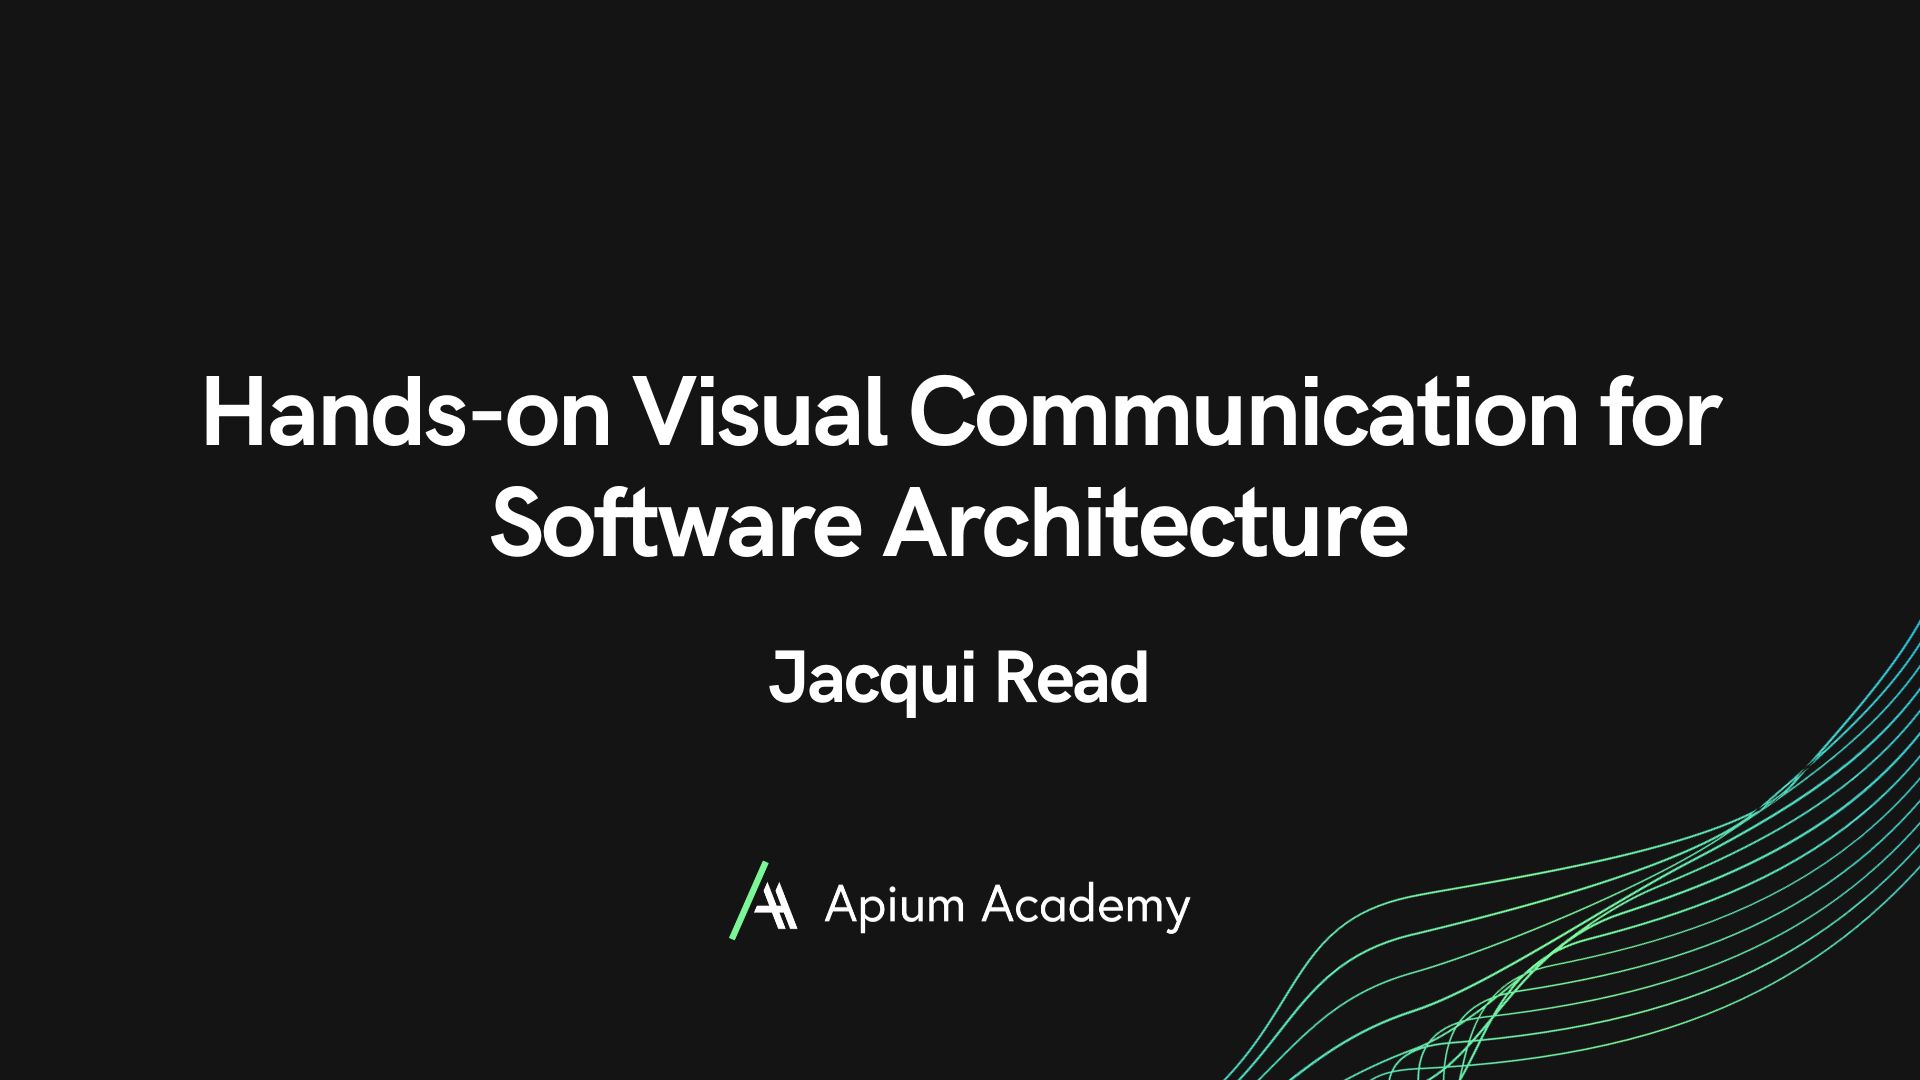 Hands-on Visual Communication for Software Architecture